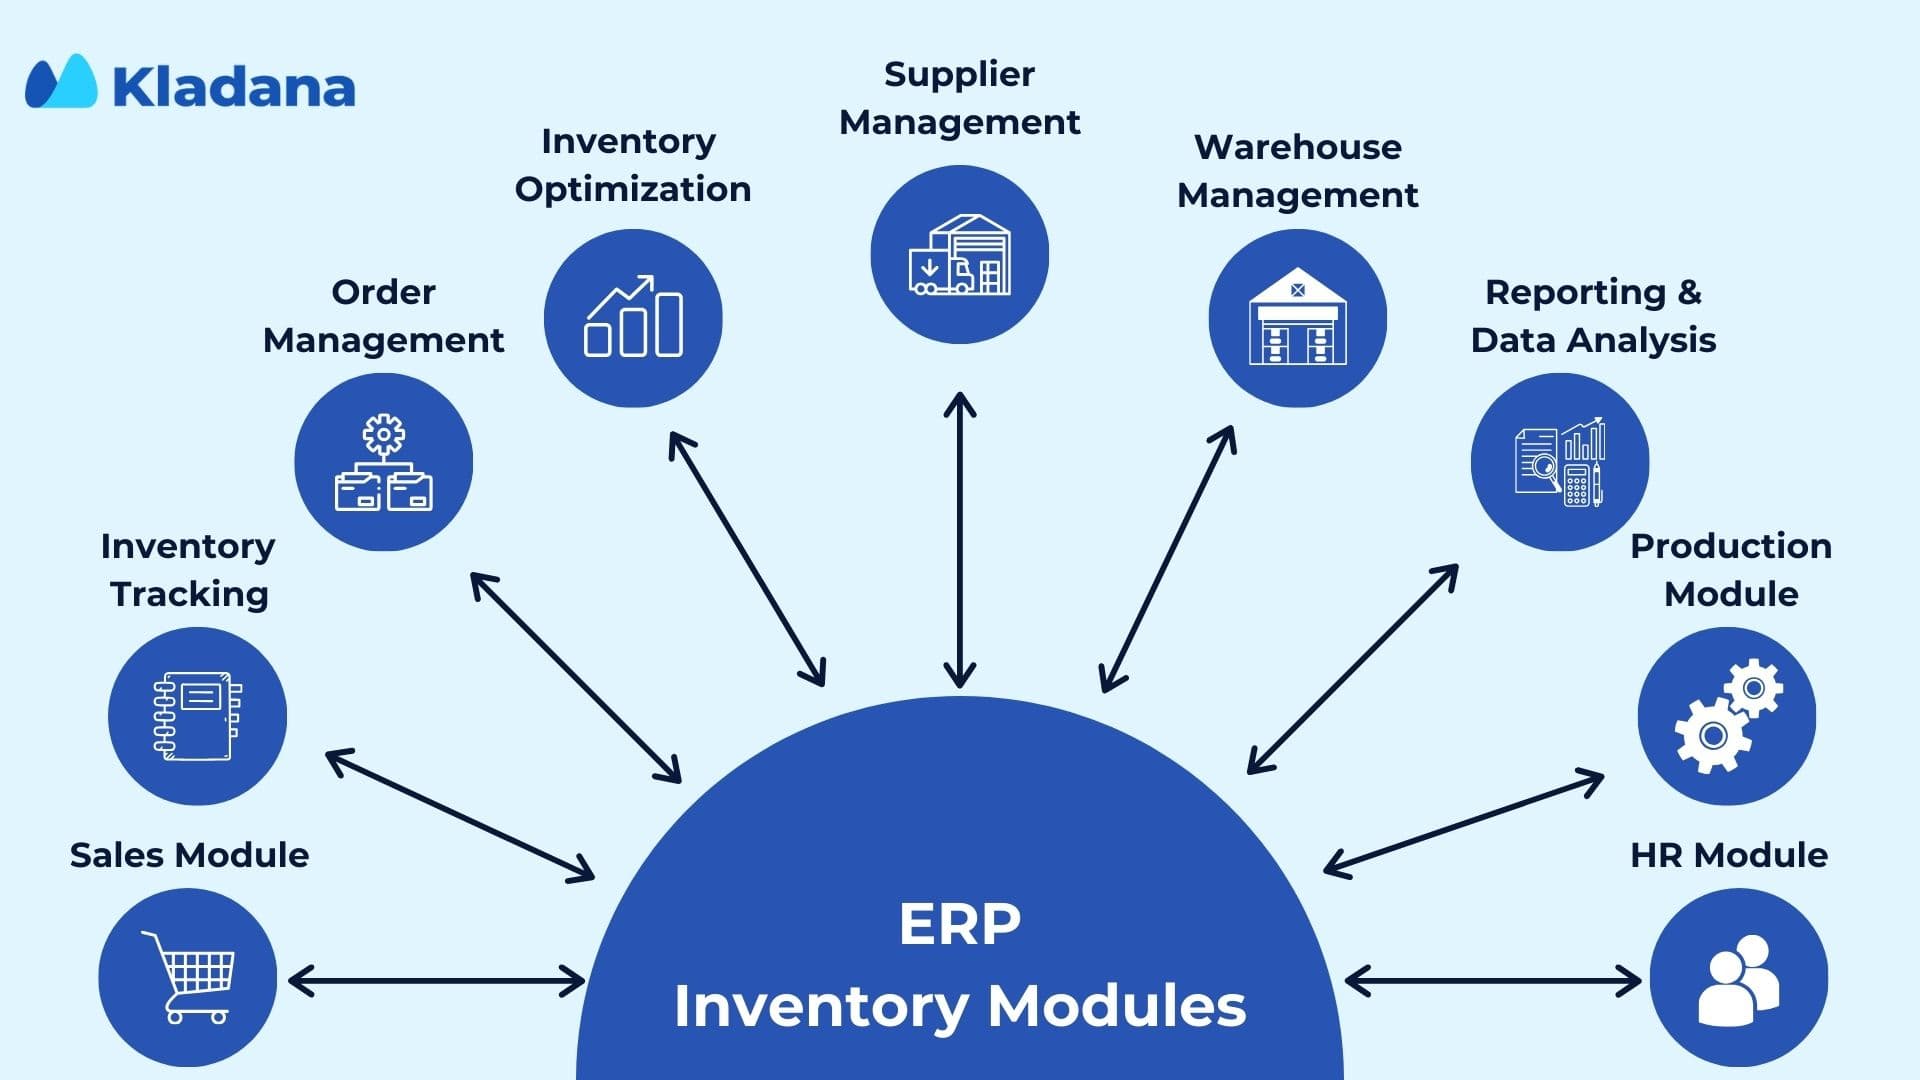 Inventory modules of the ERP